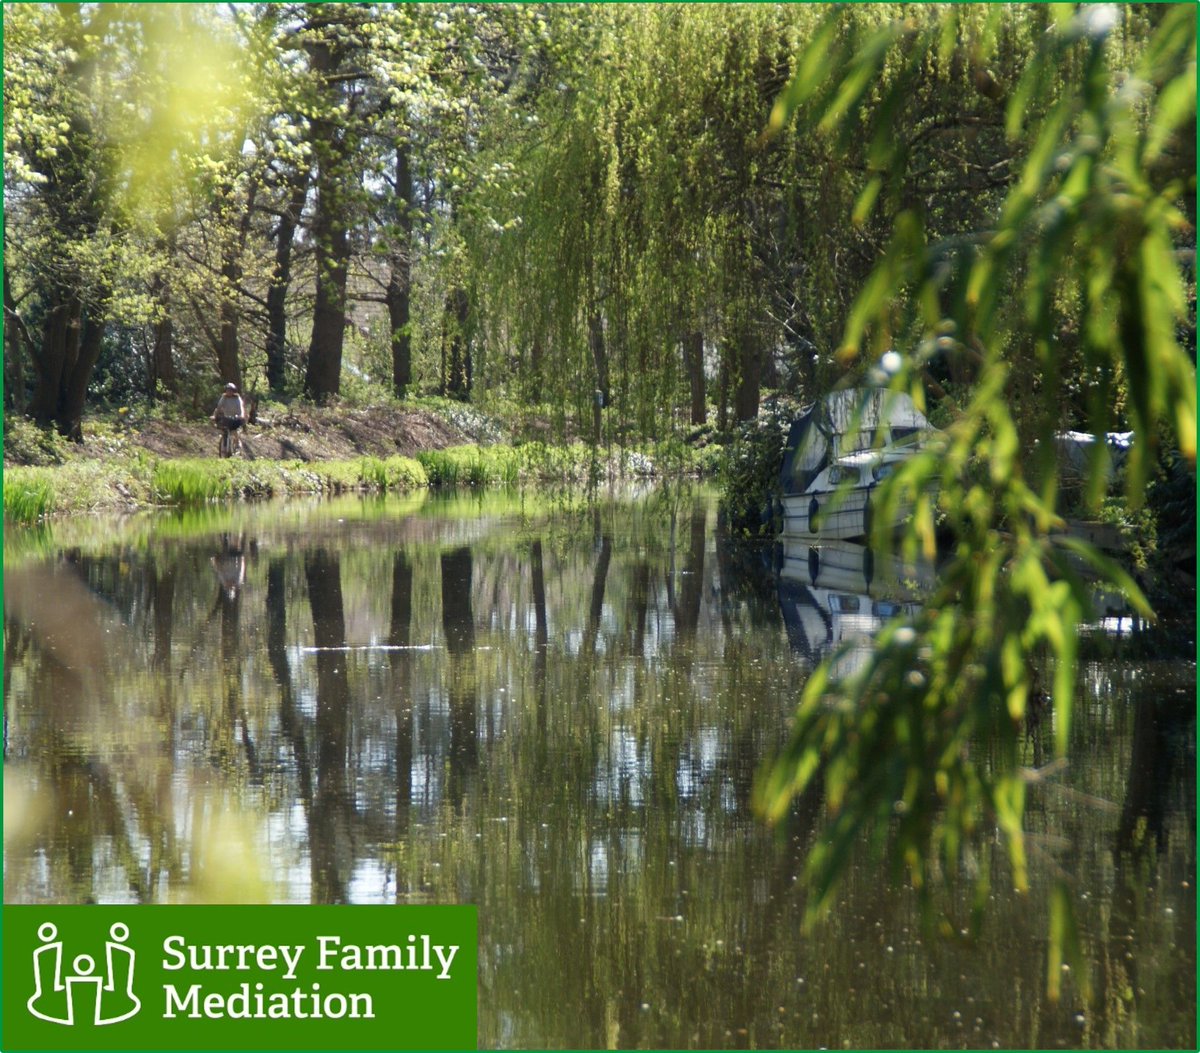 #MayDay - time to get out and enjoy nature and the fruits of spring!

Time for a change? #mediation can help discuss #separation matters: buff.ly/3Yiusr8 

#May #nature #spring #mediator #family #familymediation #professional #accredited #booknow #buylocal #woking #surrey